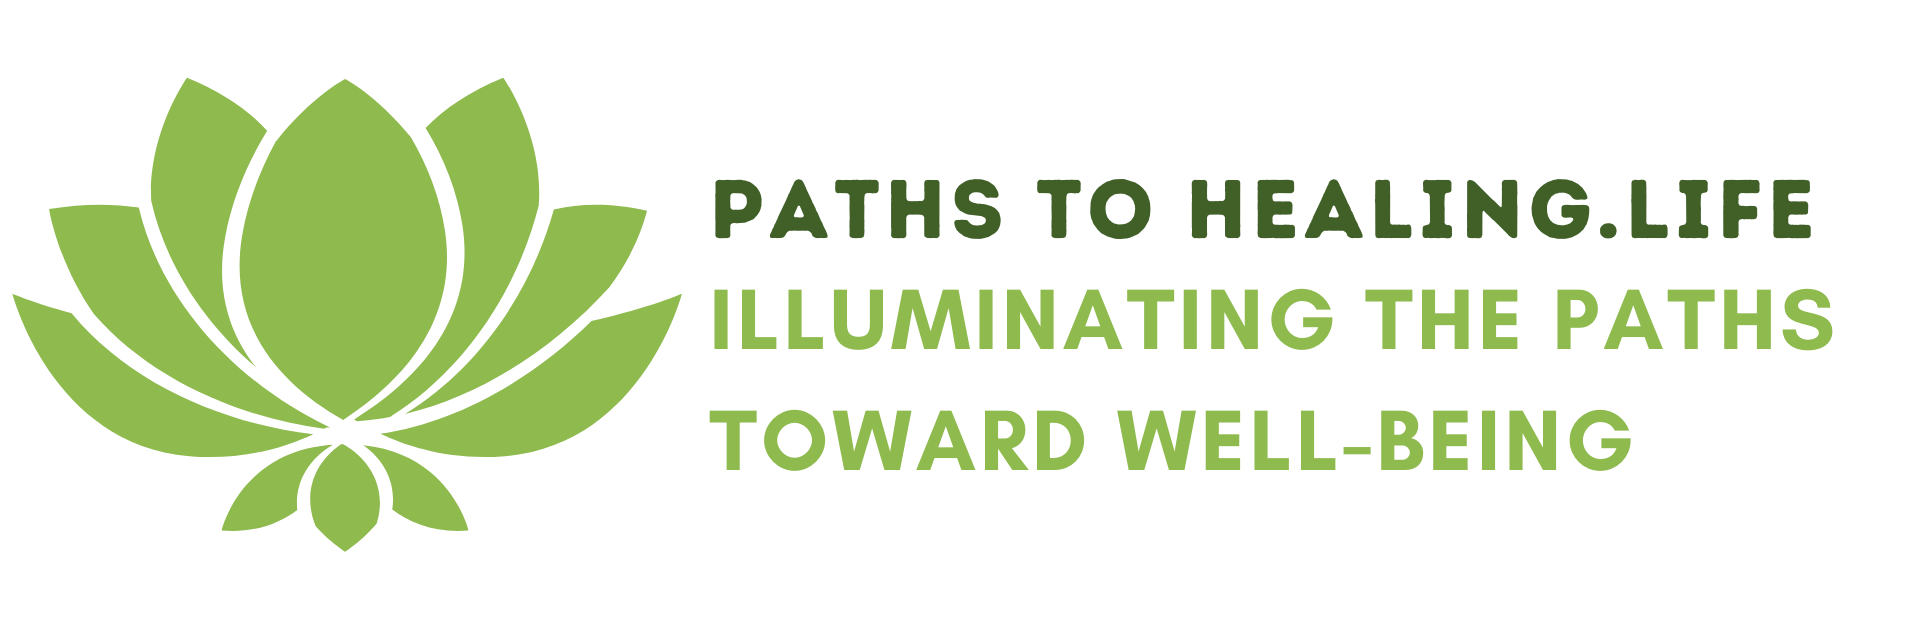 PATHS TO HEALING